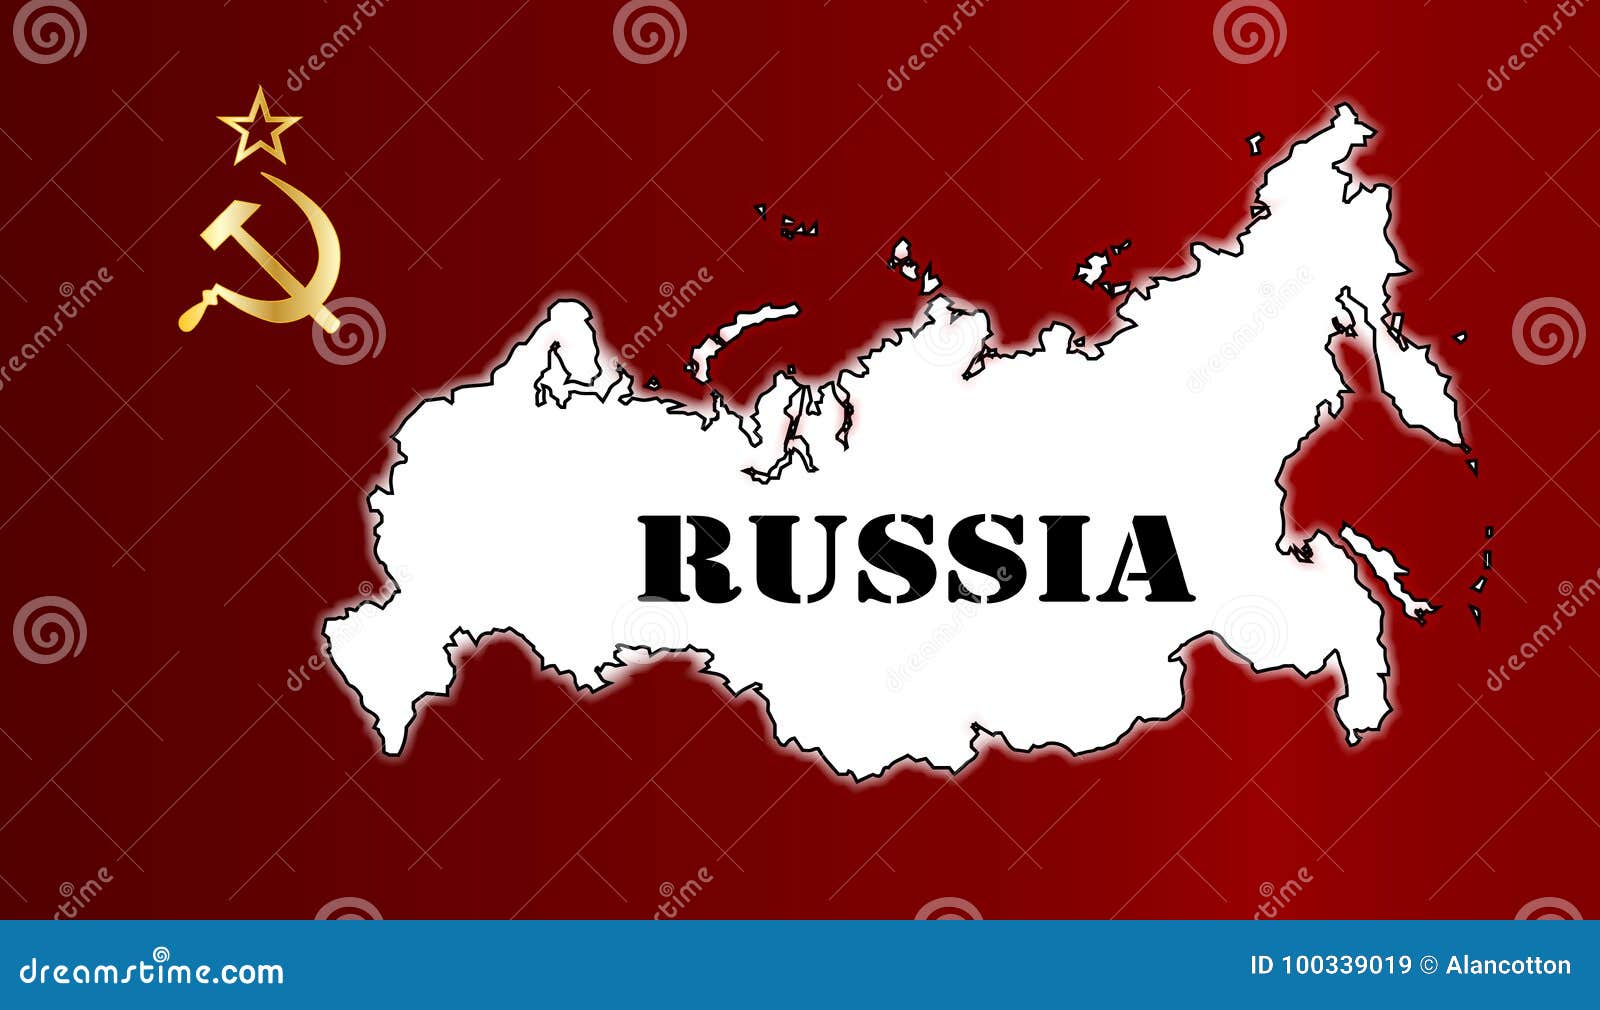 Russian Flag and Map stock vector. Illustration of international ...